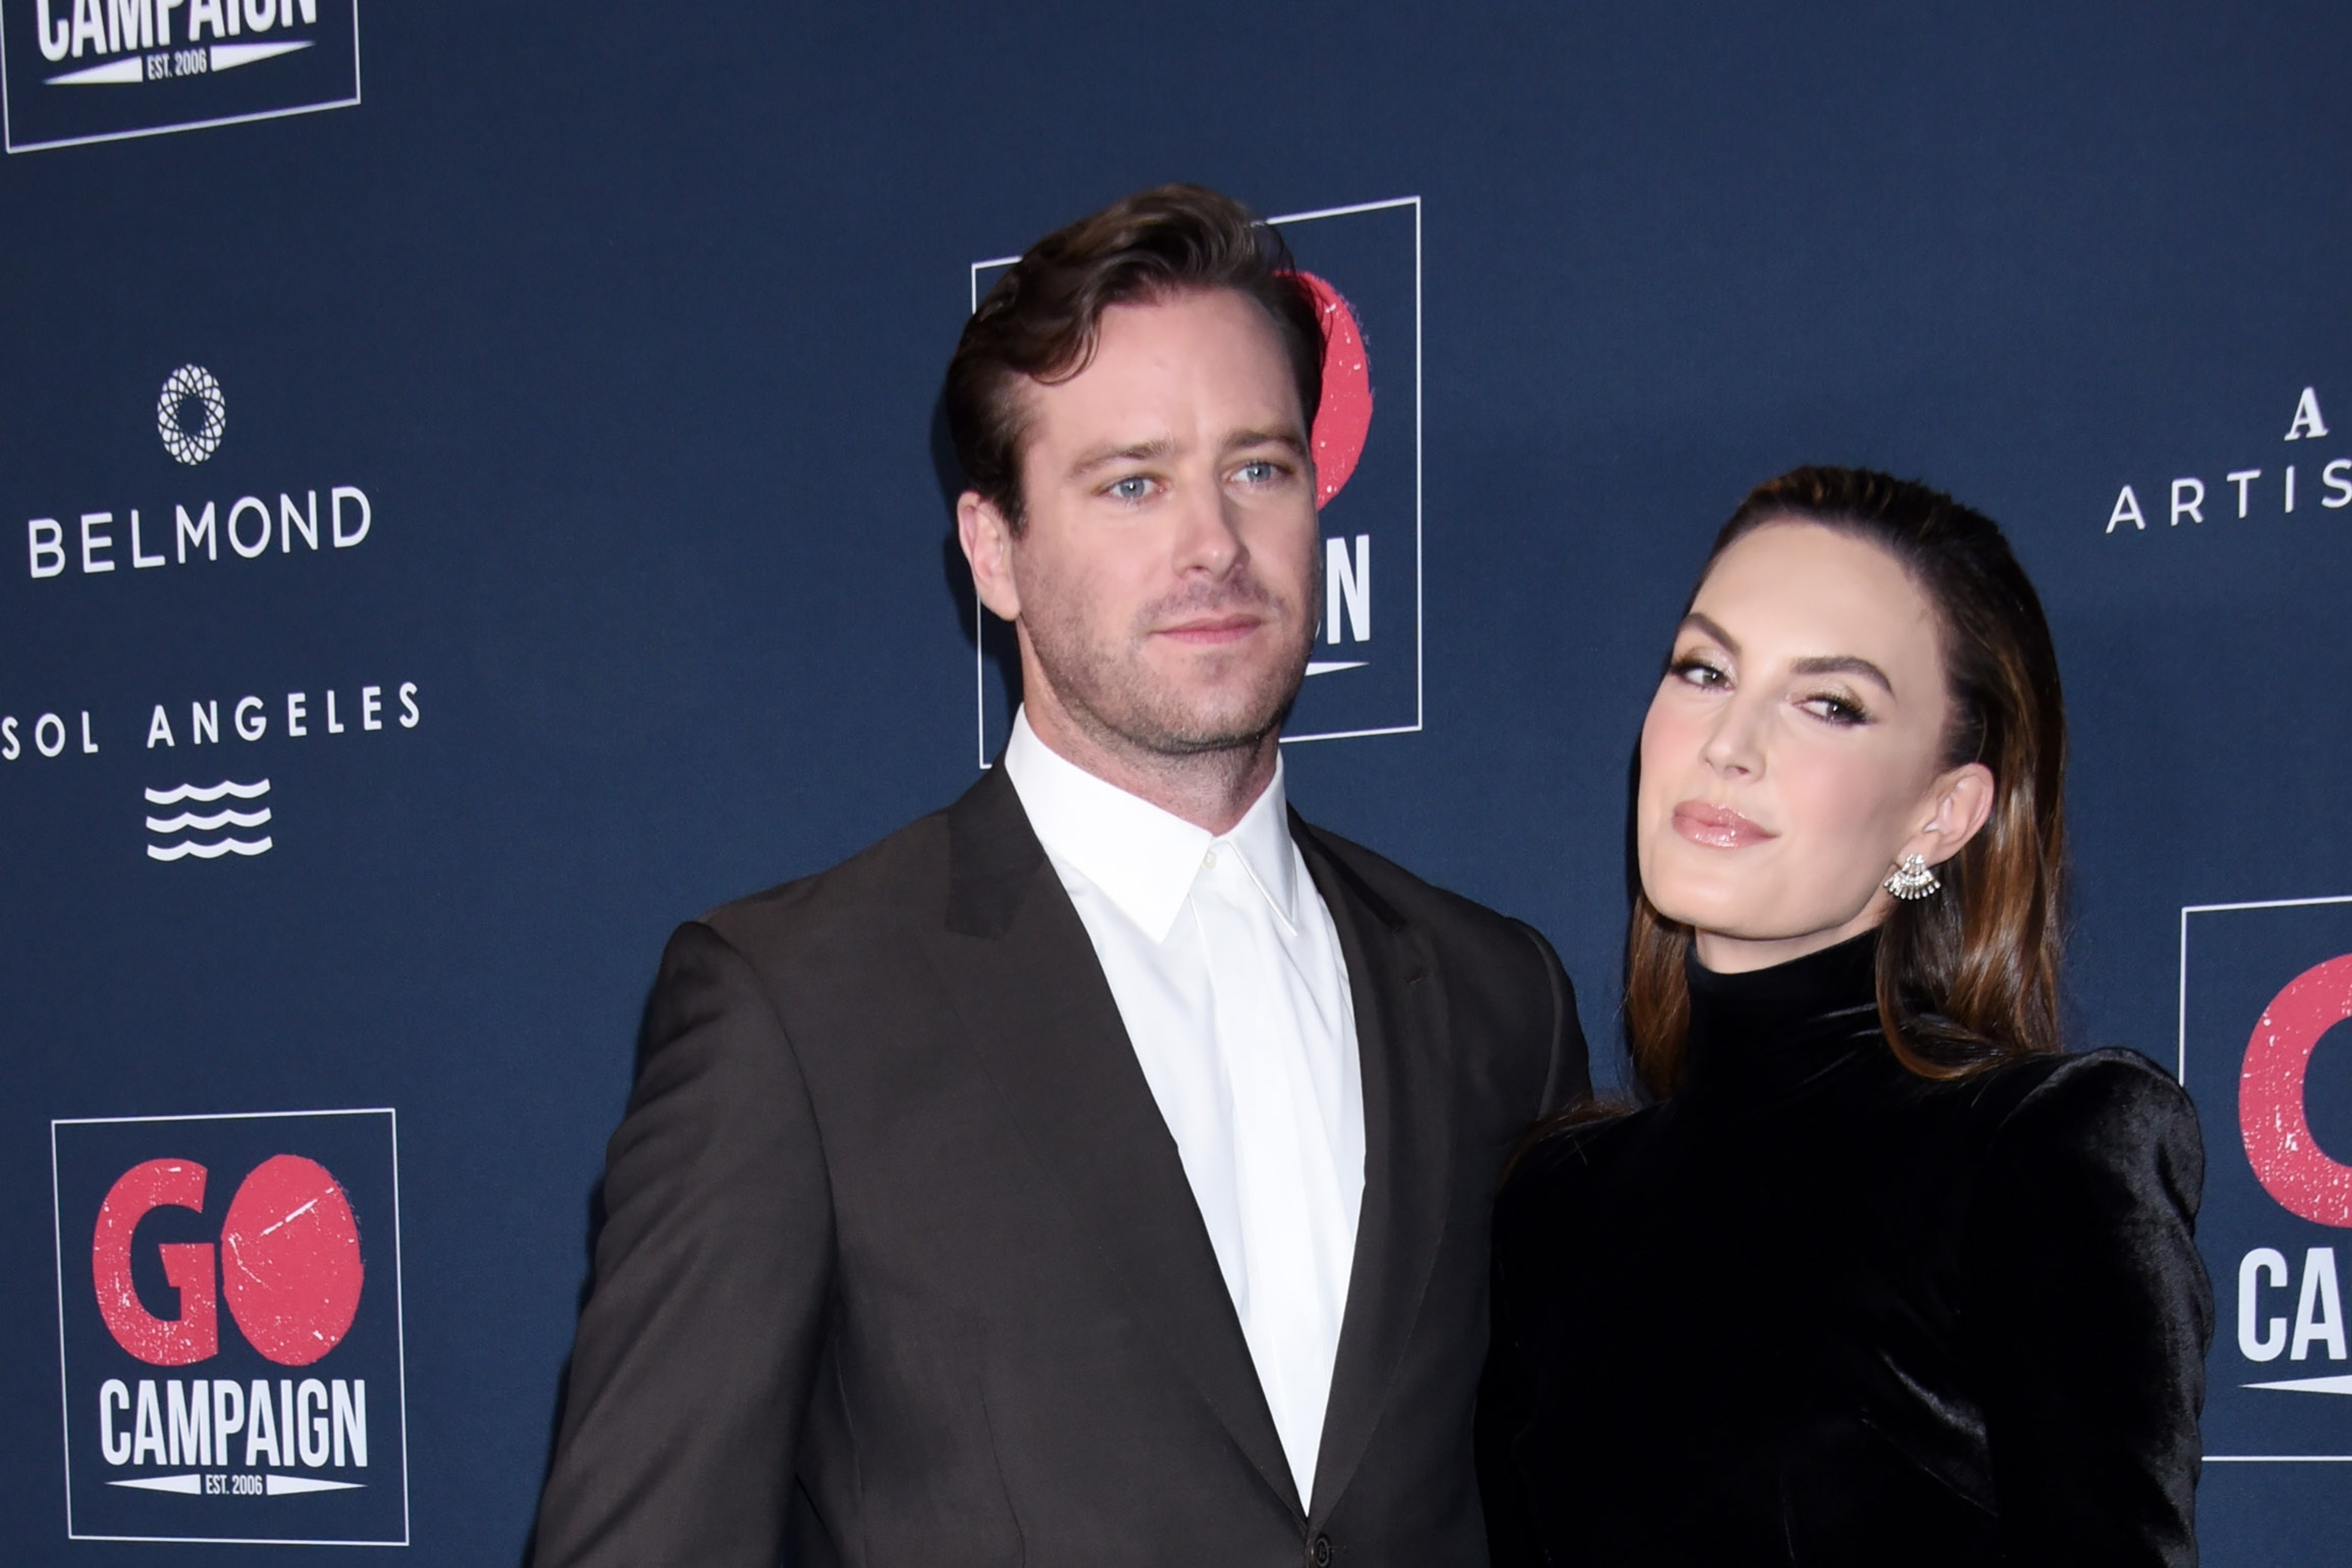 Celebrity Armie Hammer Cleared of Sexual Assault Charges as LA DA’s Office Ends Probe, Web Fans Have Mixed Reactions